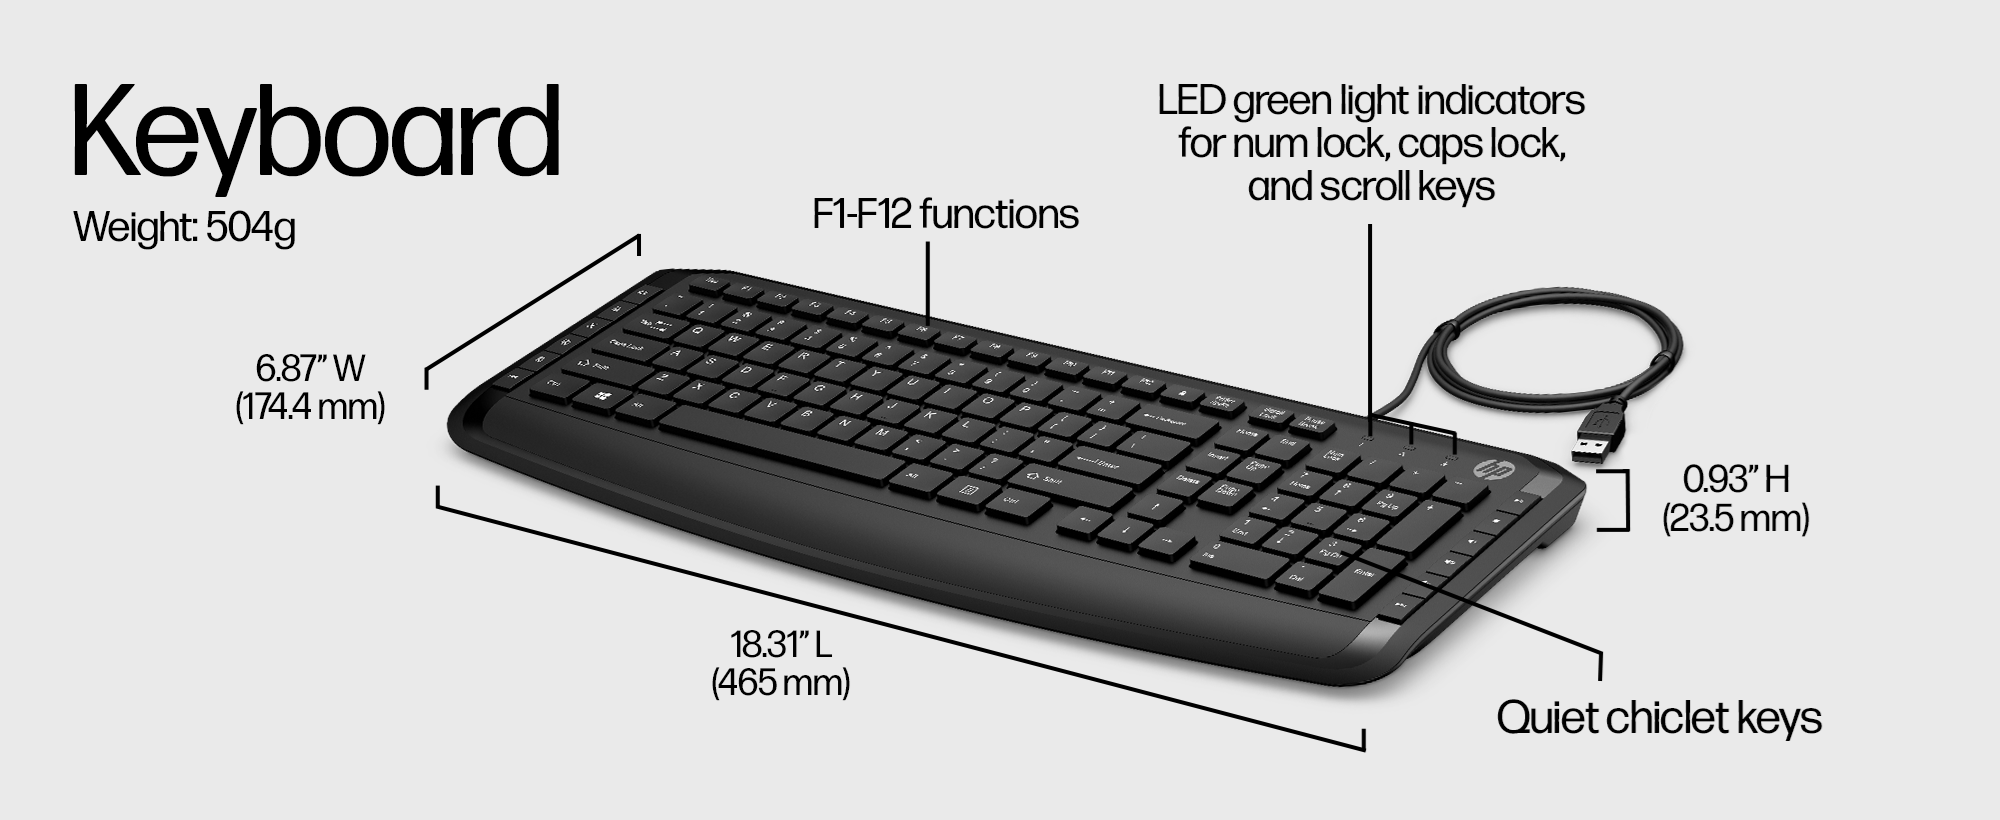 Pavilion and - - 9DF28AA#ABL set - 200 black mouse keyboard HP